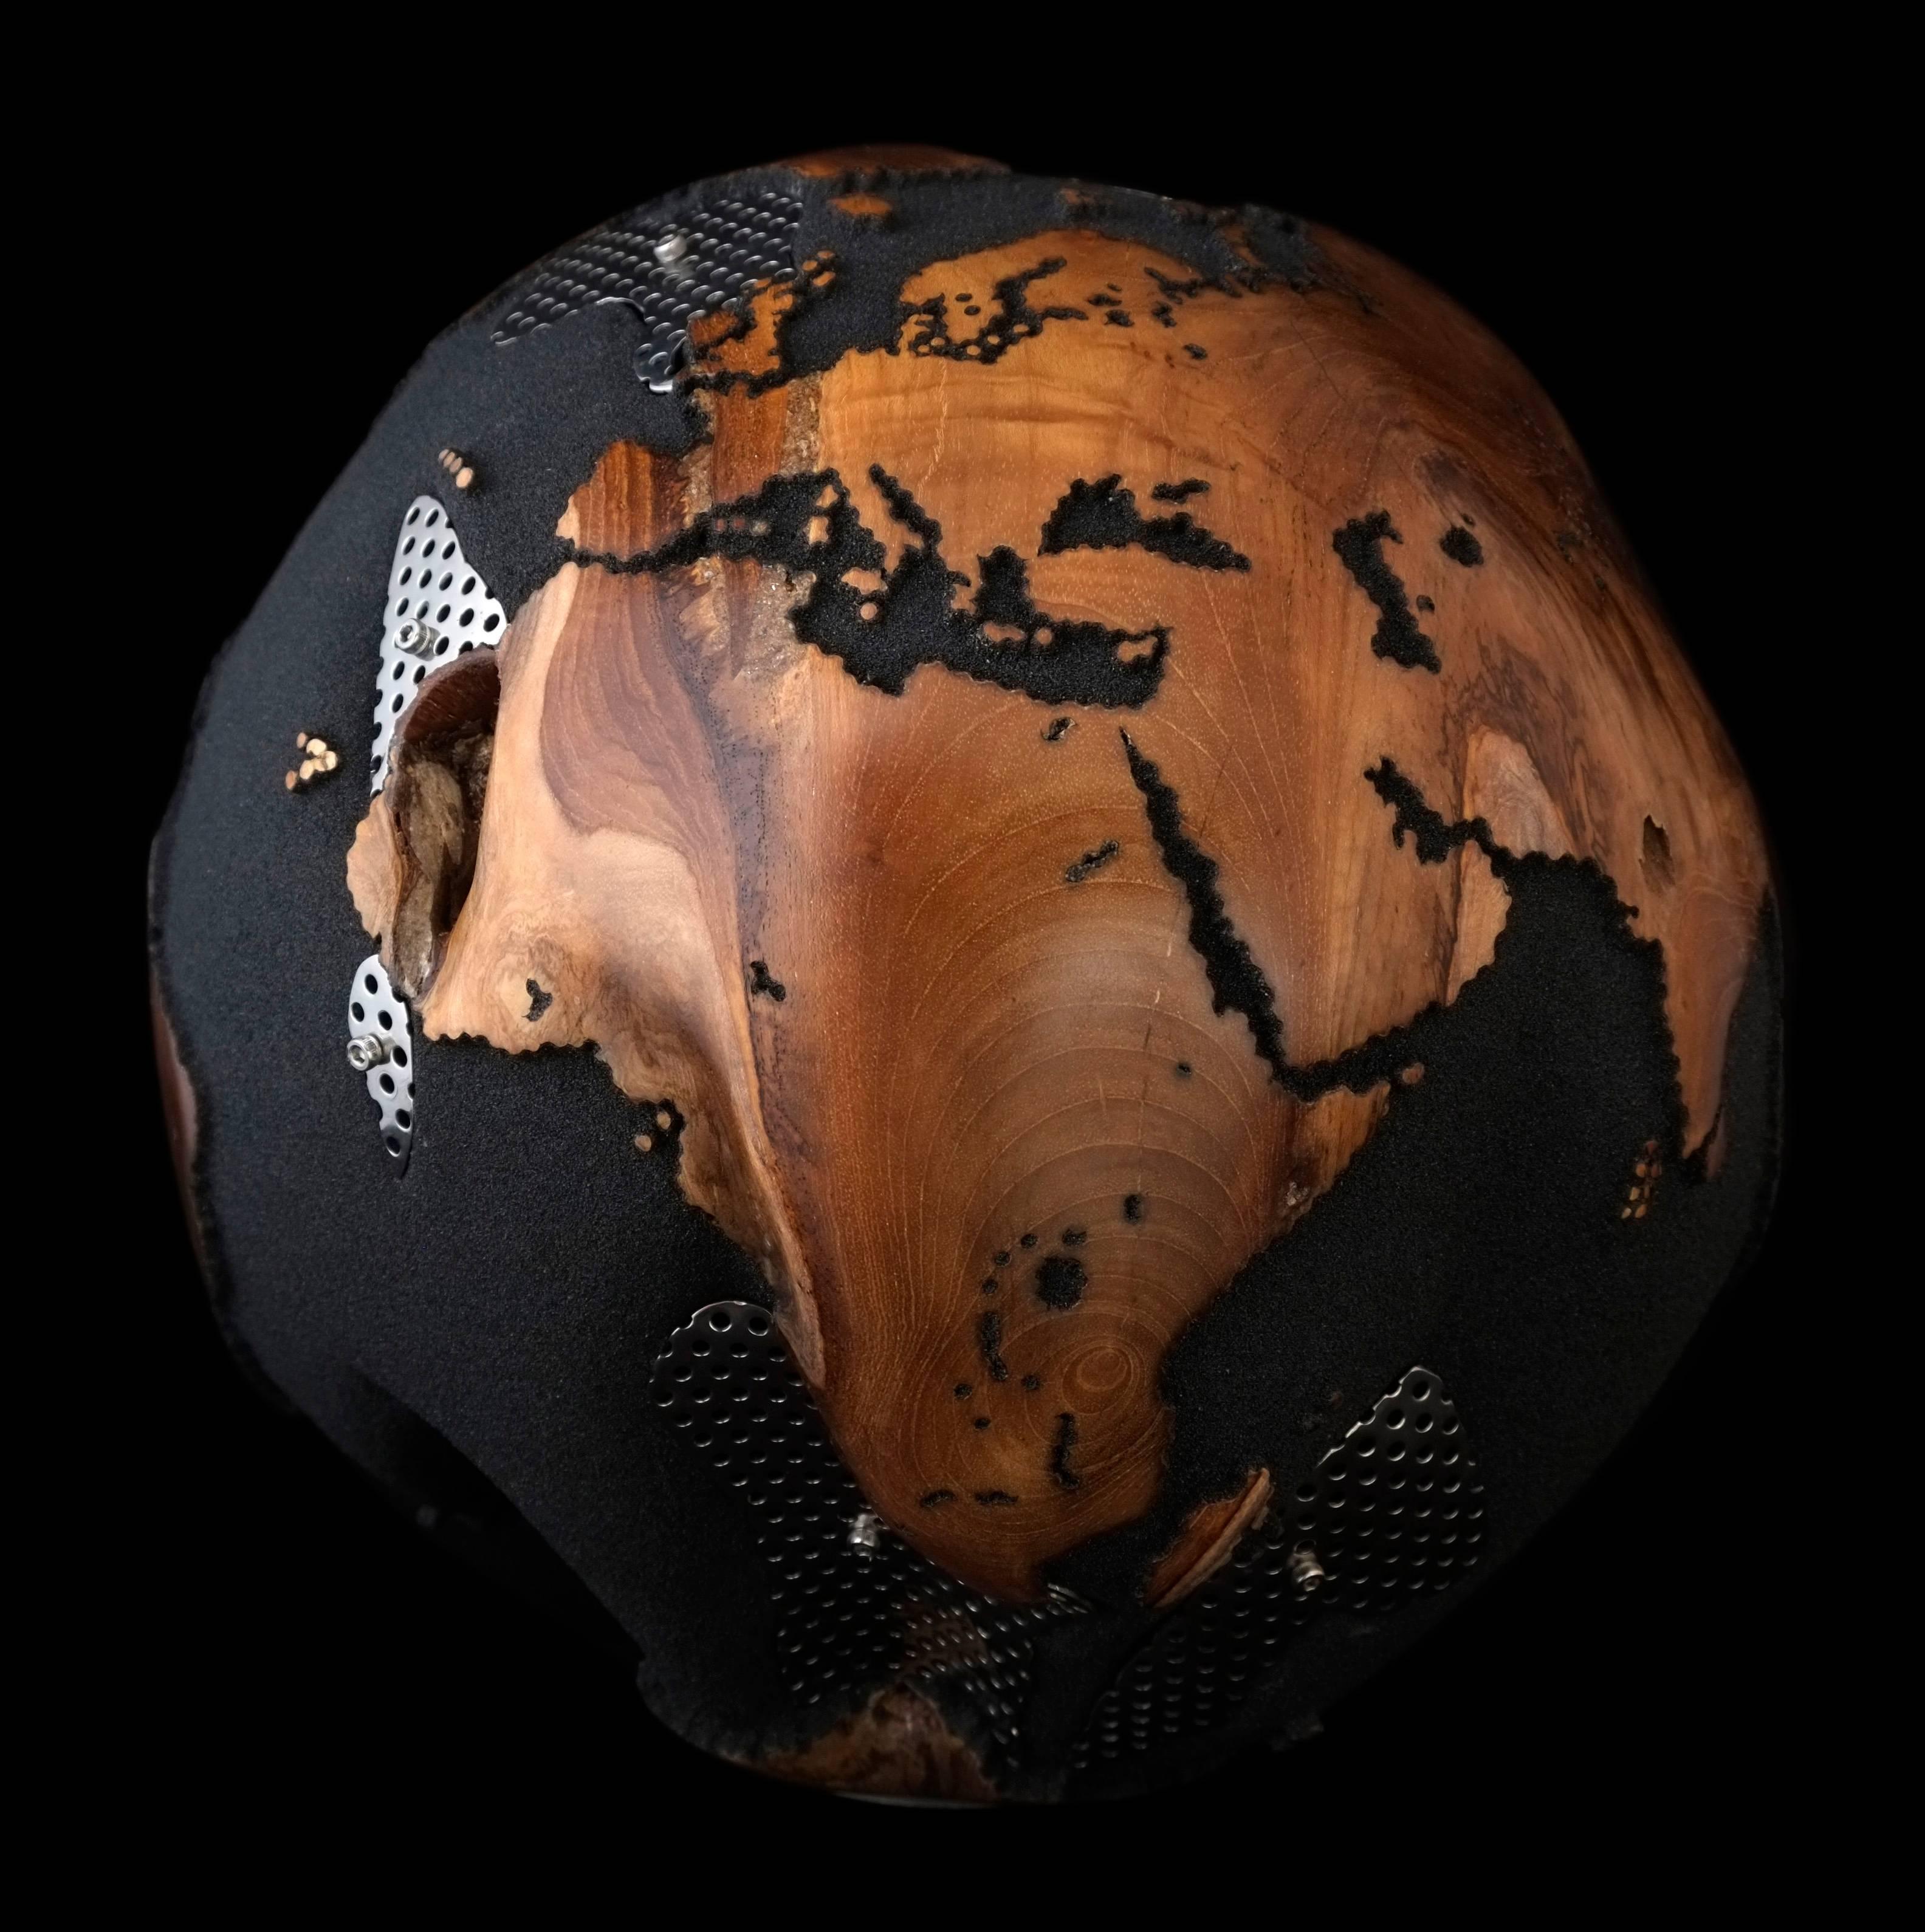 Behind the mask of ice that people wear, there beat a heart of fire.

Hand-carved wooden globe made of teak root in volcanic sand finishing, with fascinating features of stainless steel plates that mask the teak root's natural holes fastened by